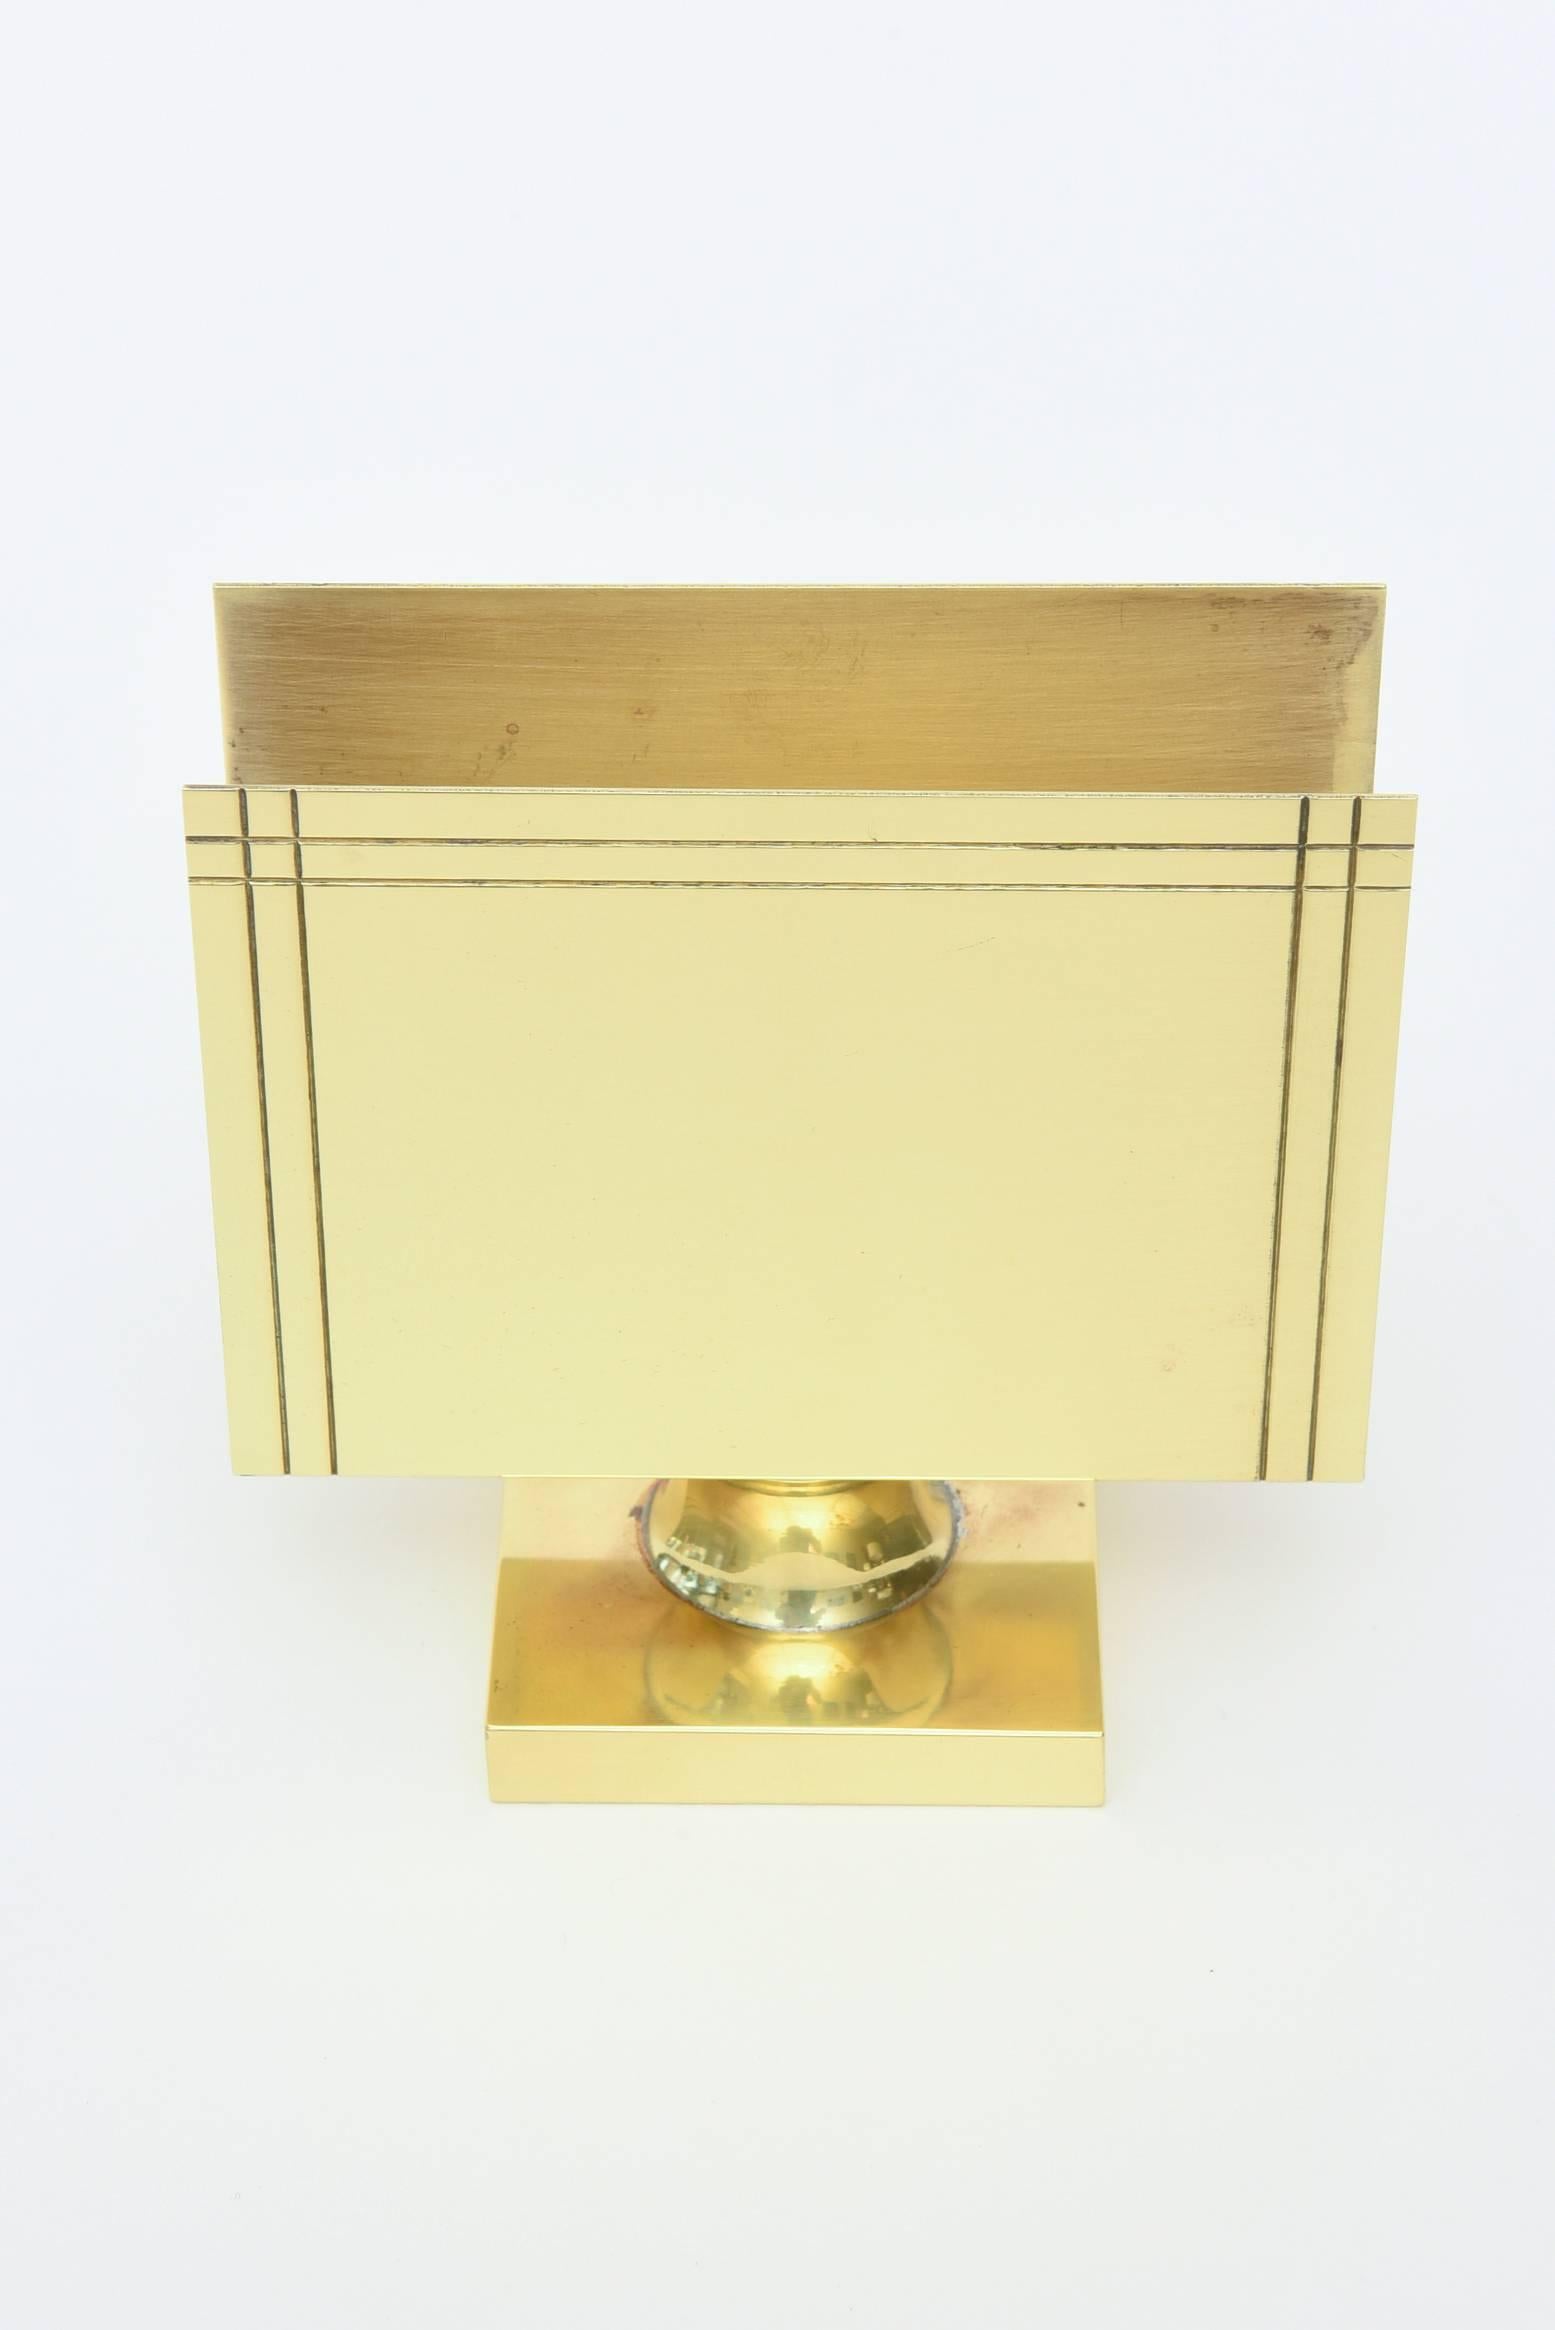 This classic and timeless solid polished brass holder is stamped on the bottom Made by Dorlyn-Silversmiths; that is who executed Tommi par zinger designs in metal.
At one time, this also may have been used for large matchbooks.
What a great desk